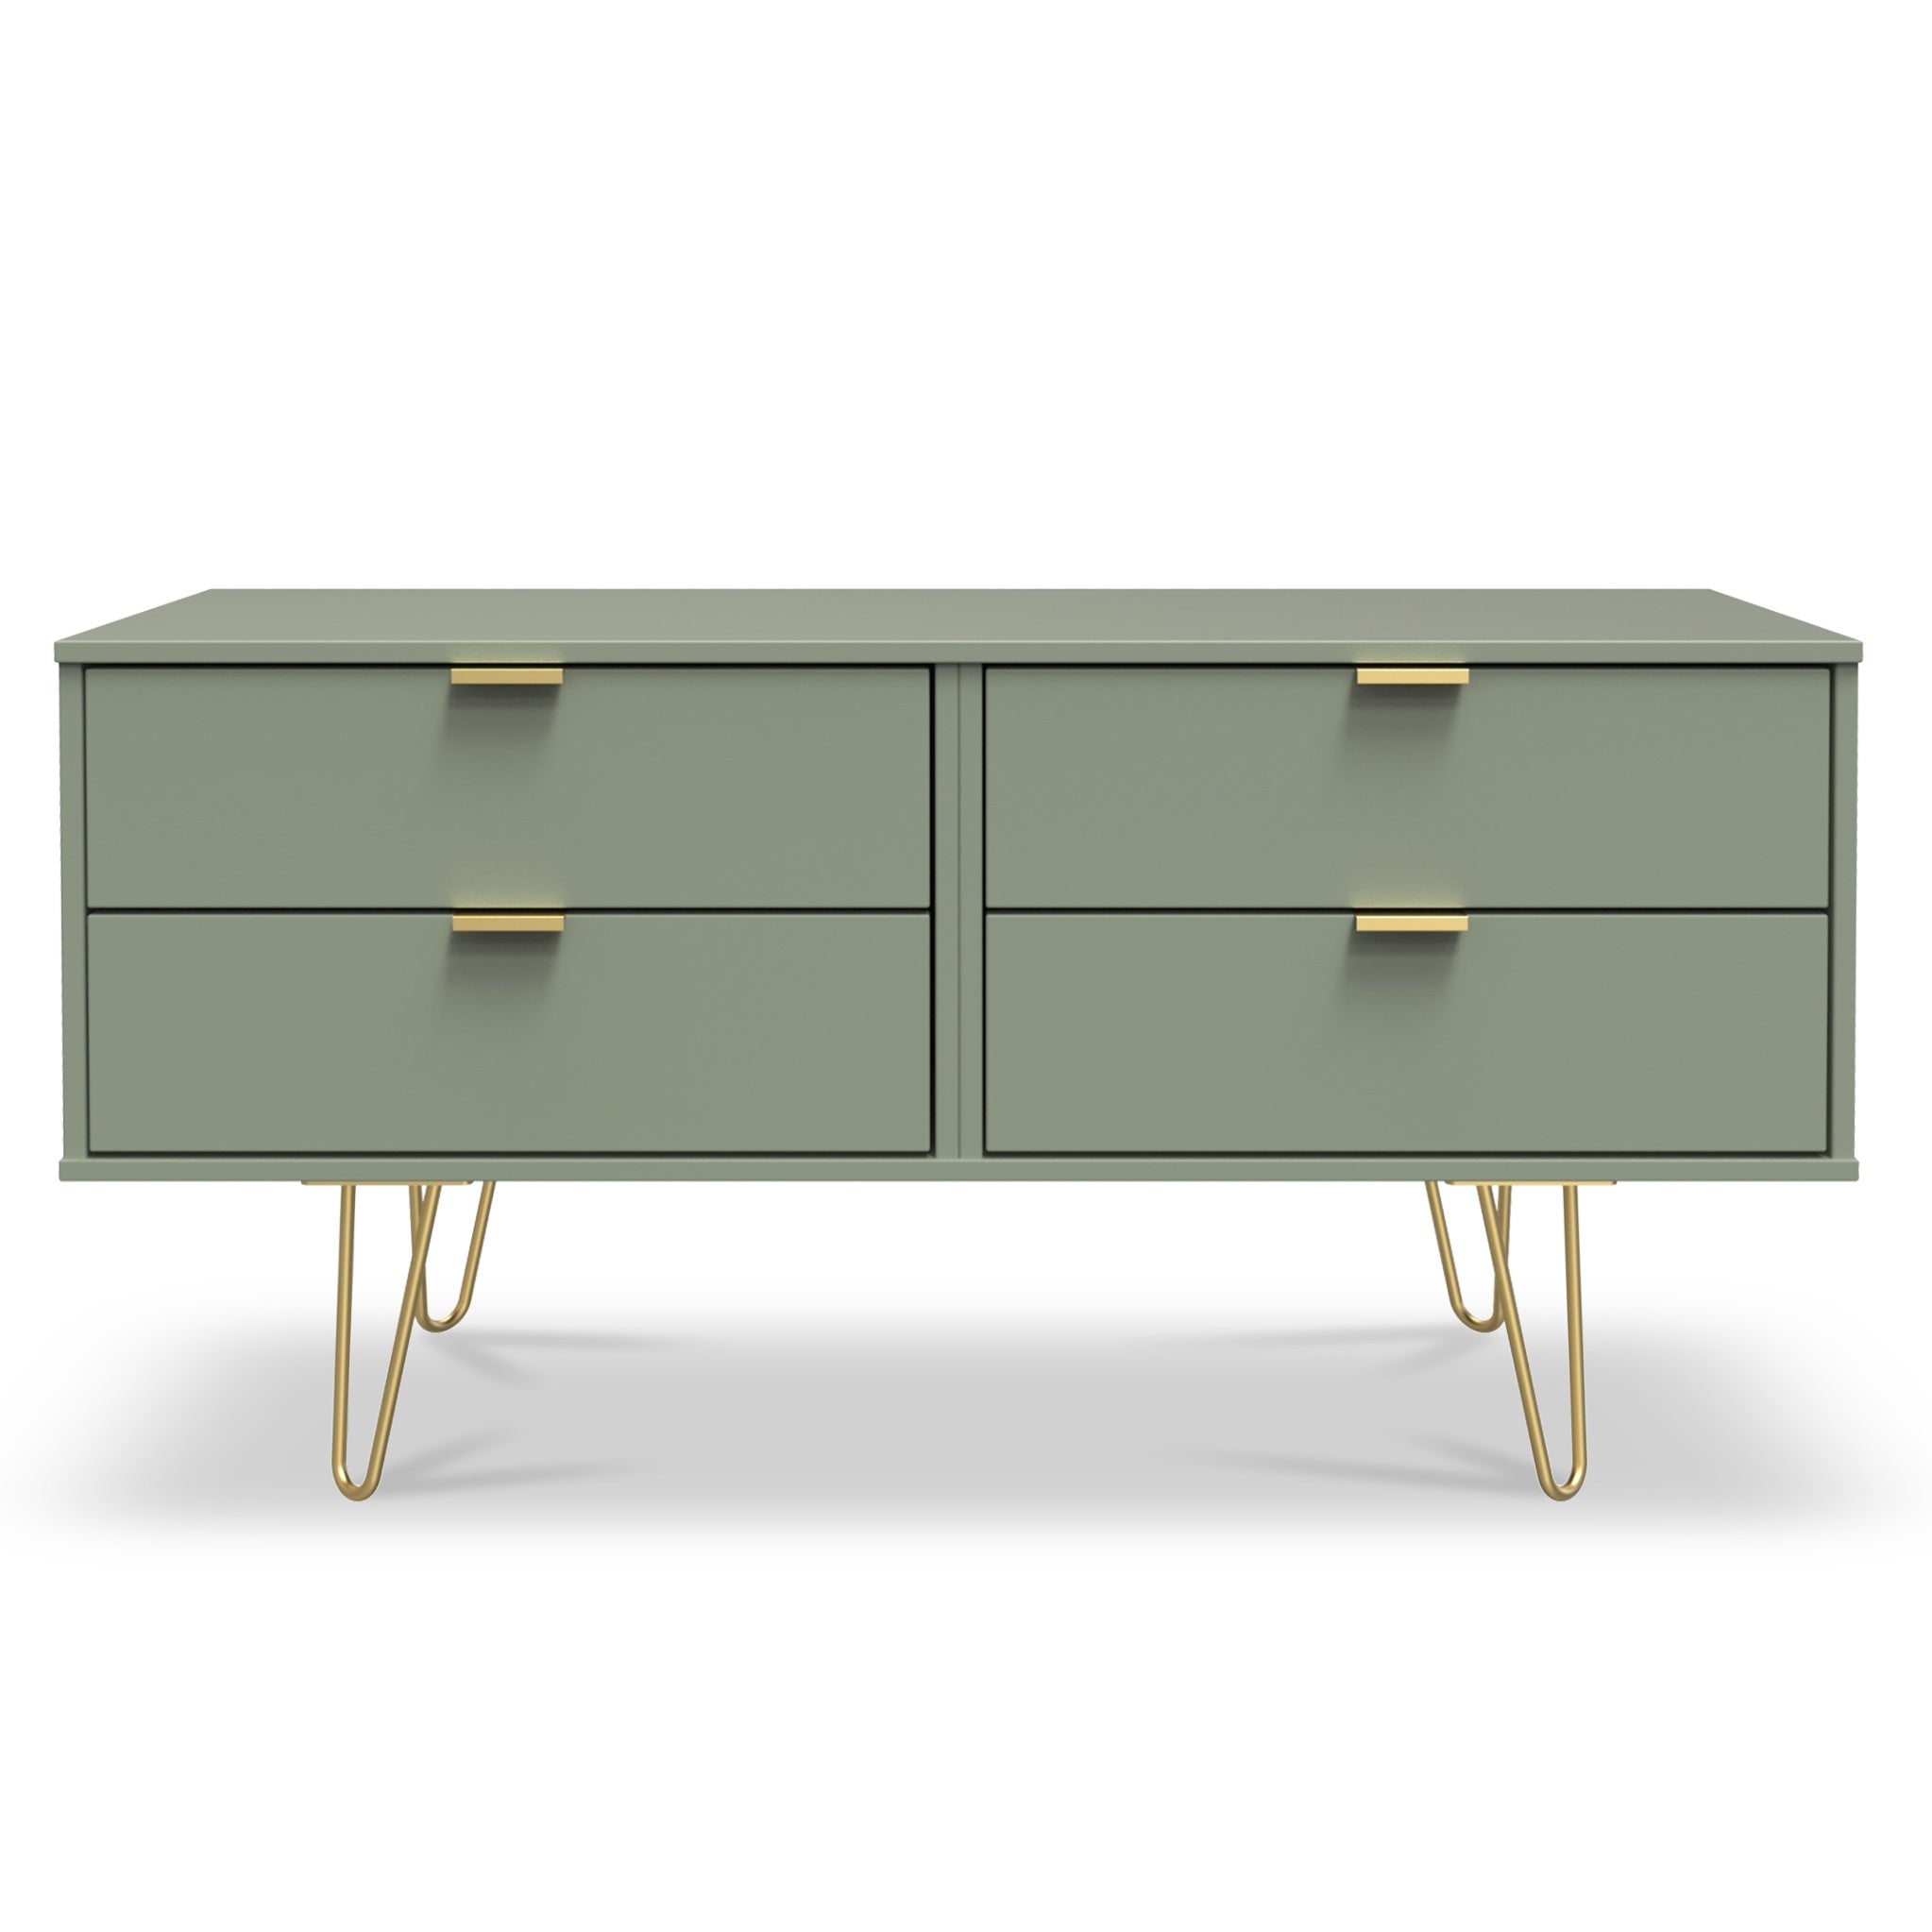 Moreno 4 Drawer Low Storage Chest Unit Olive Green Or Graphite Grey